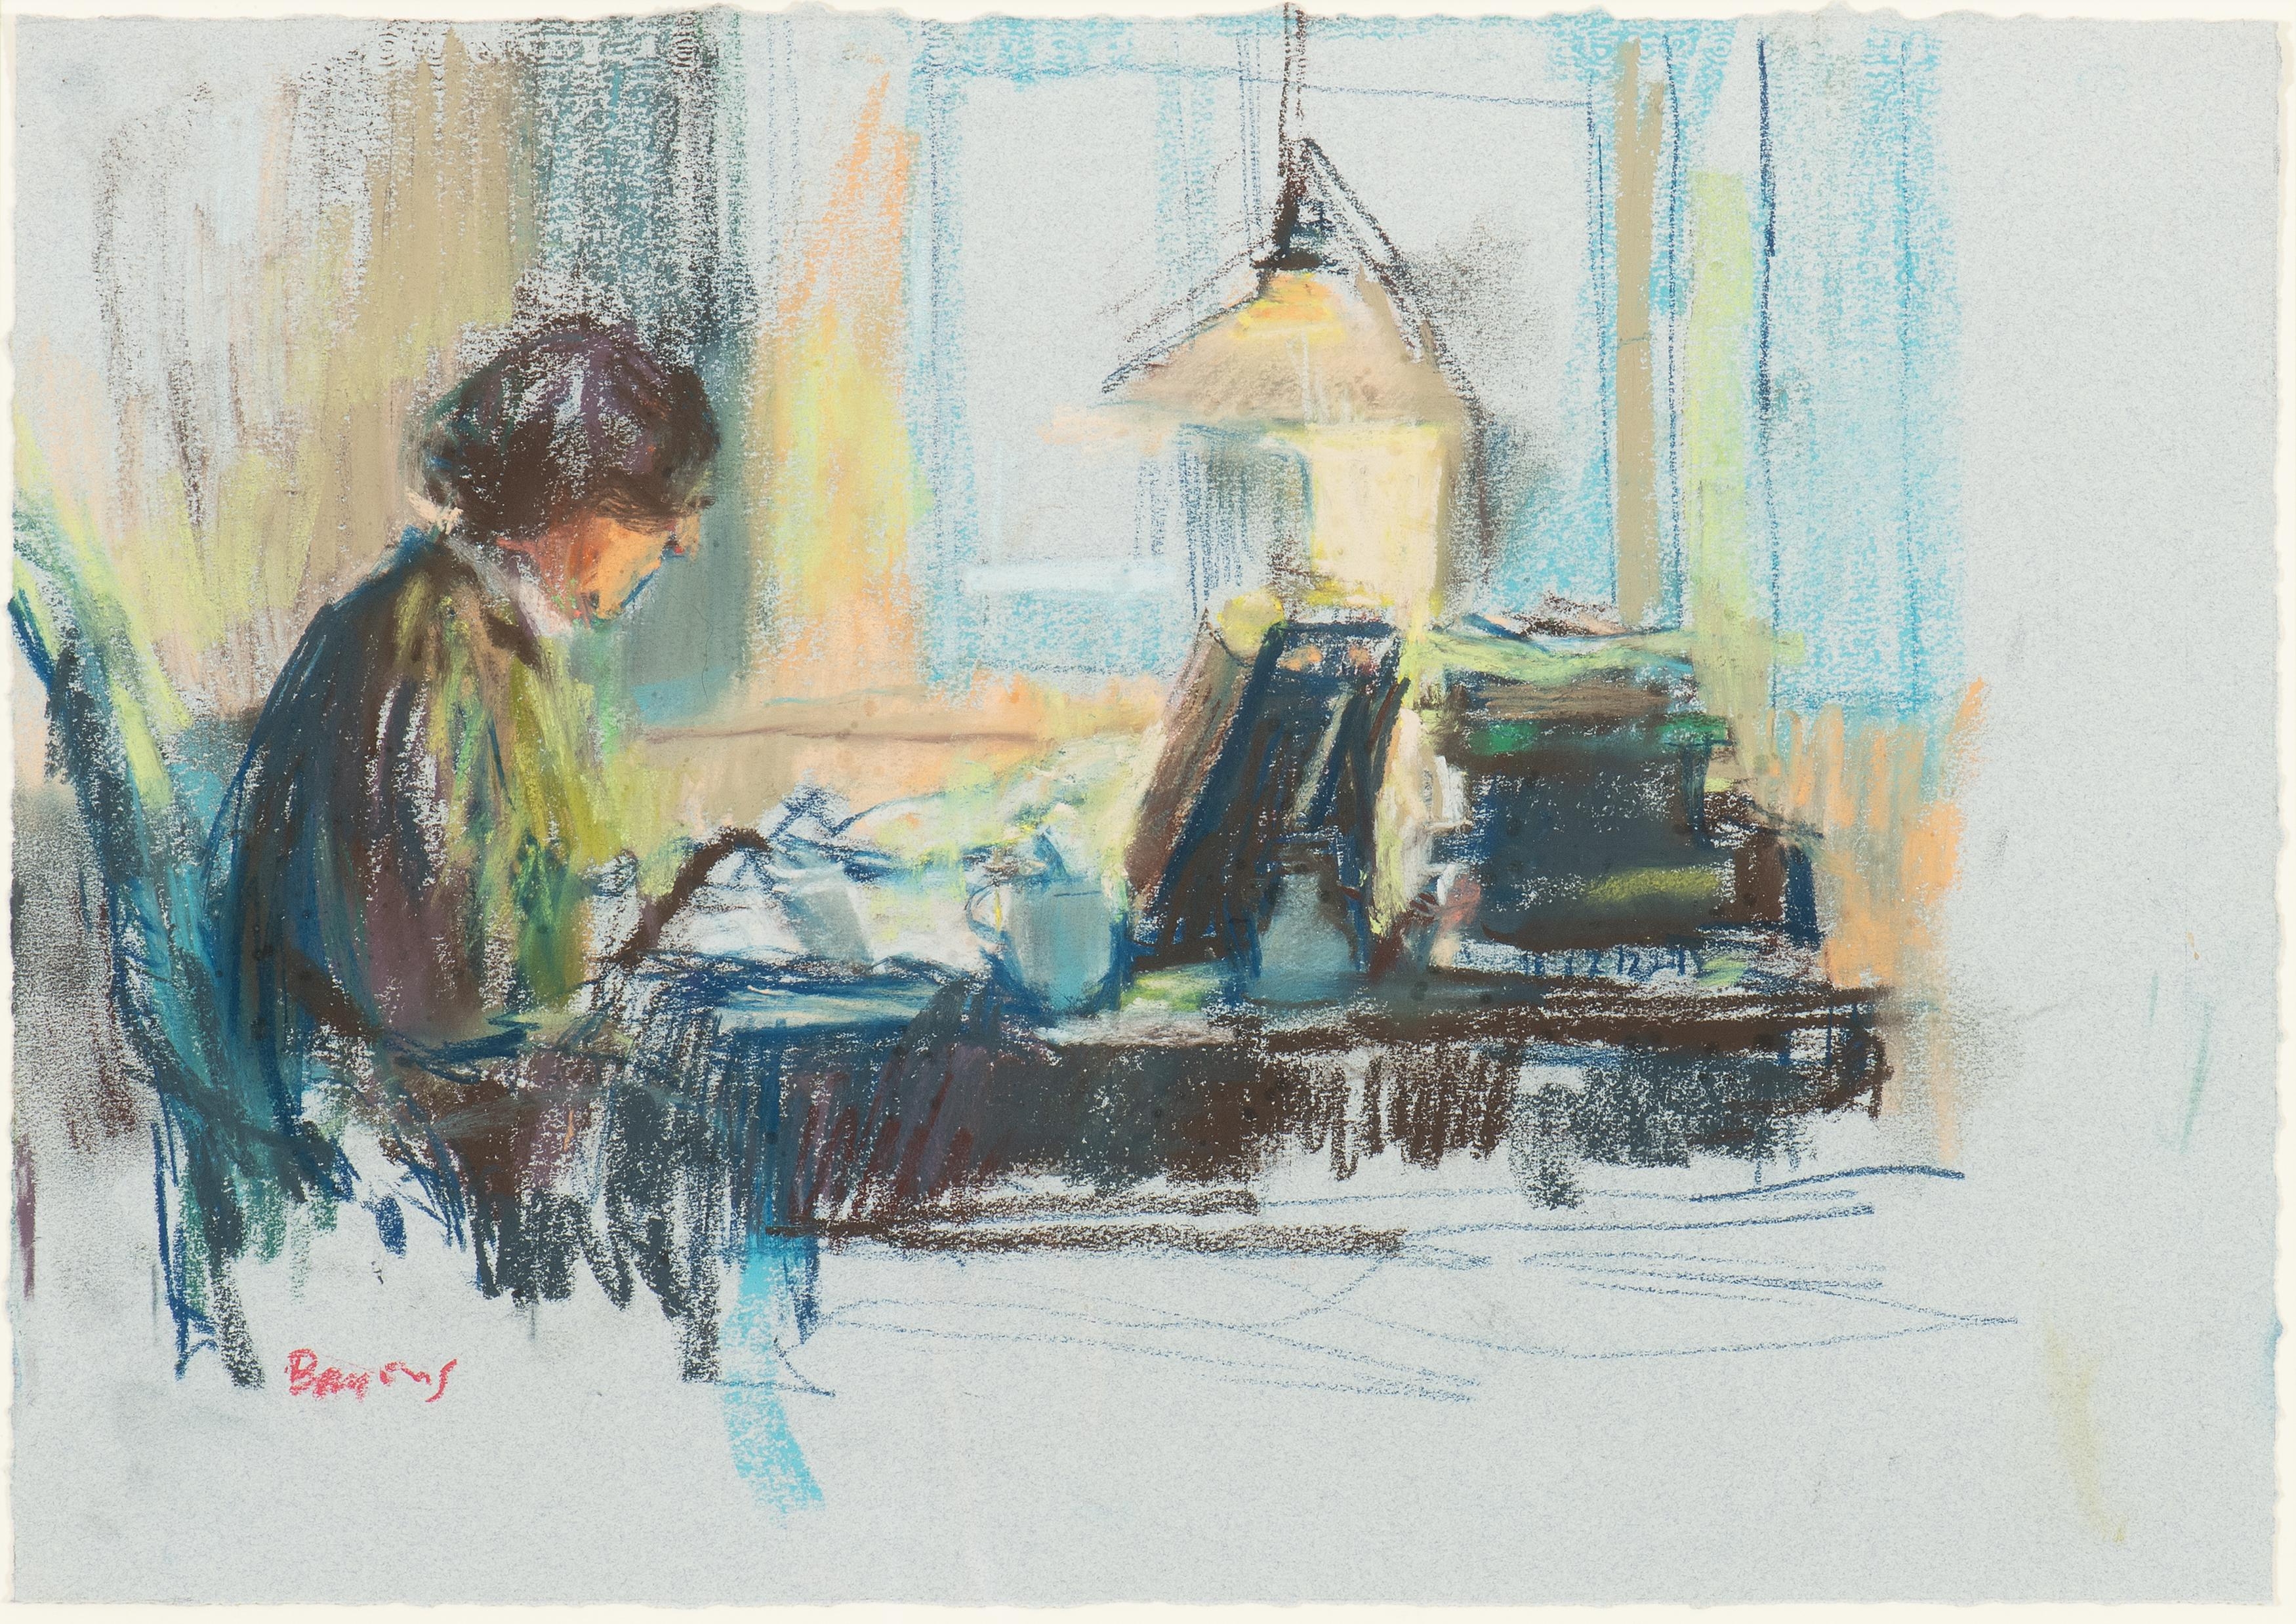 Artwork by Hans Bayens, Thérèse Cornips at work, Made of Pastel on grey paper